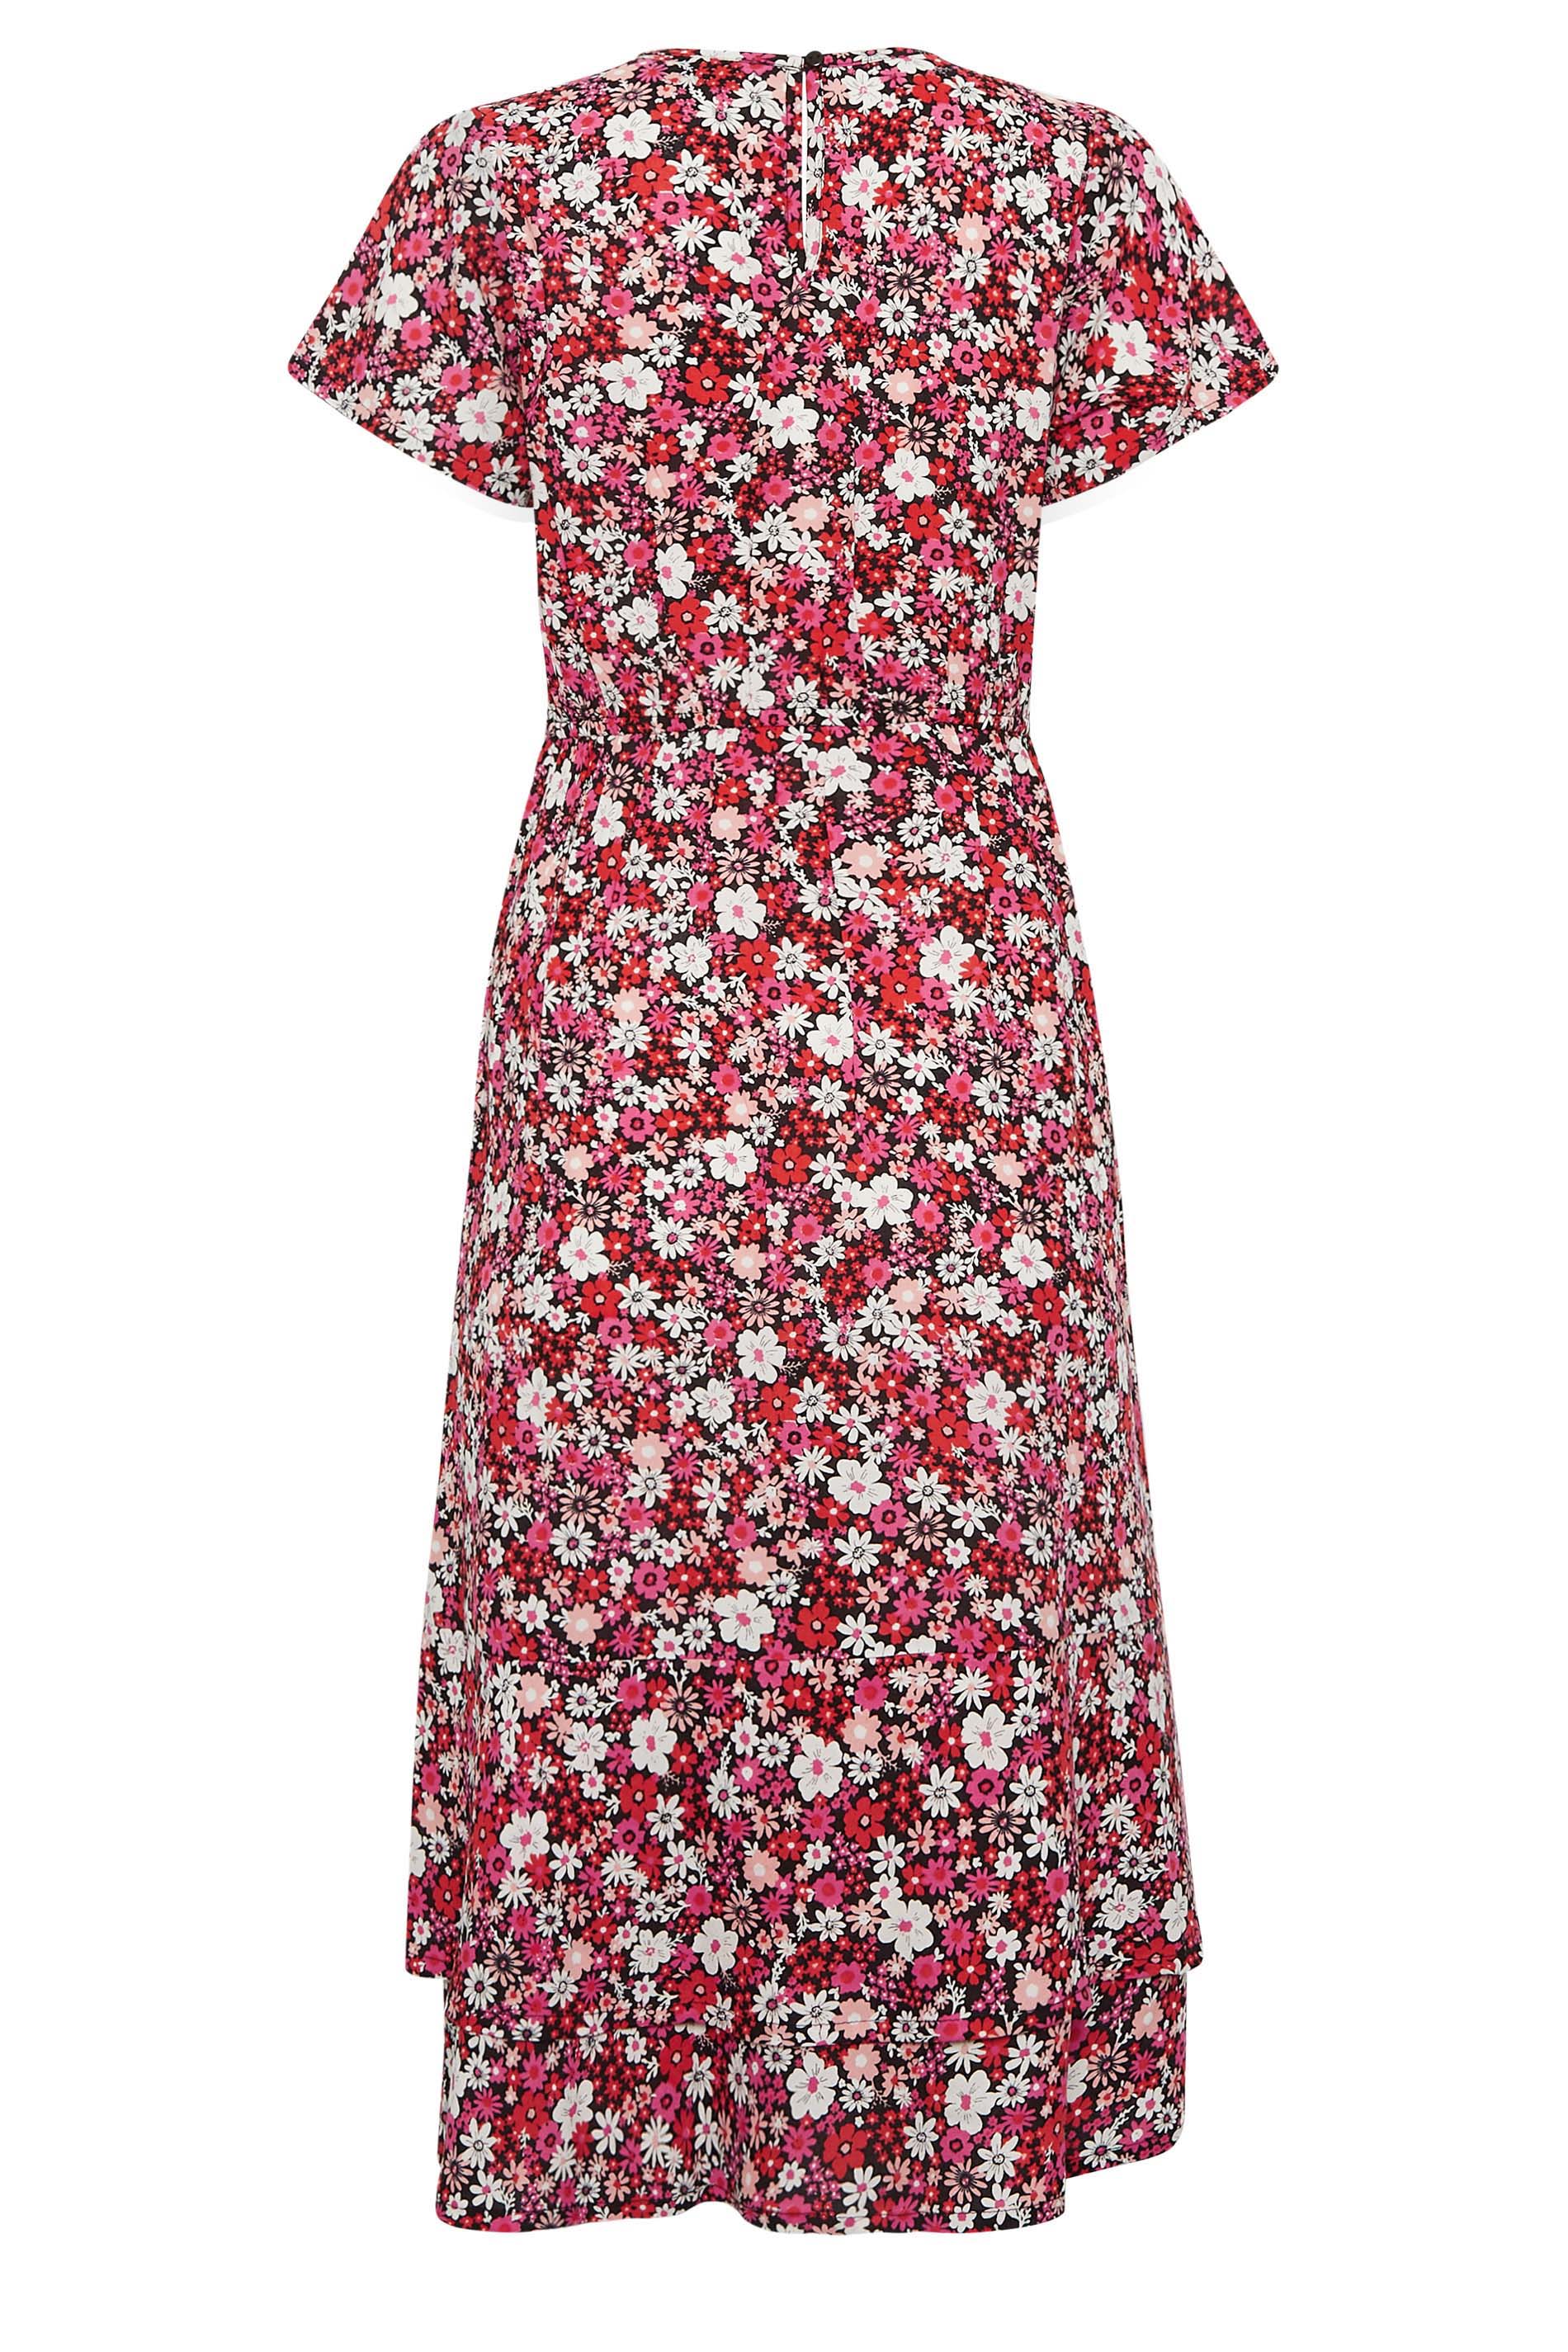 YOURS PETITE Plus Size Pink Floral Tie Waist Midaxi Dress | Yours Clothing 2